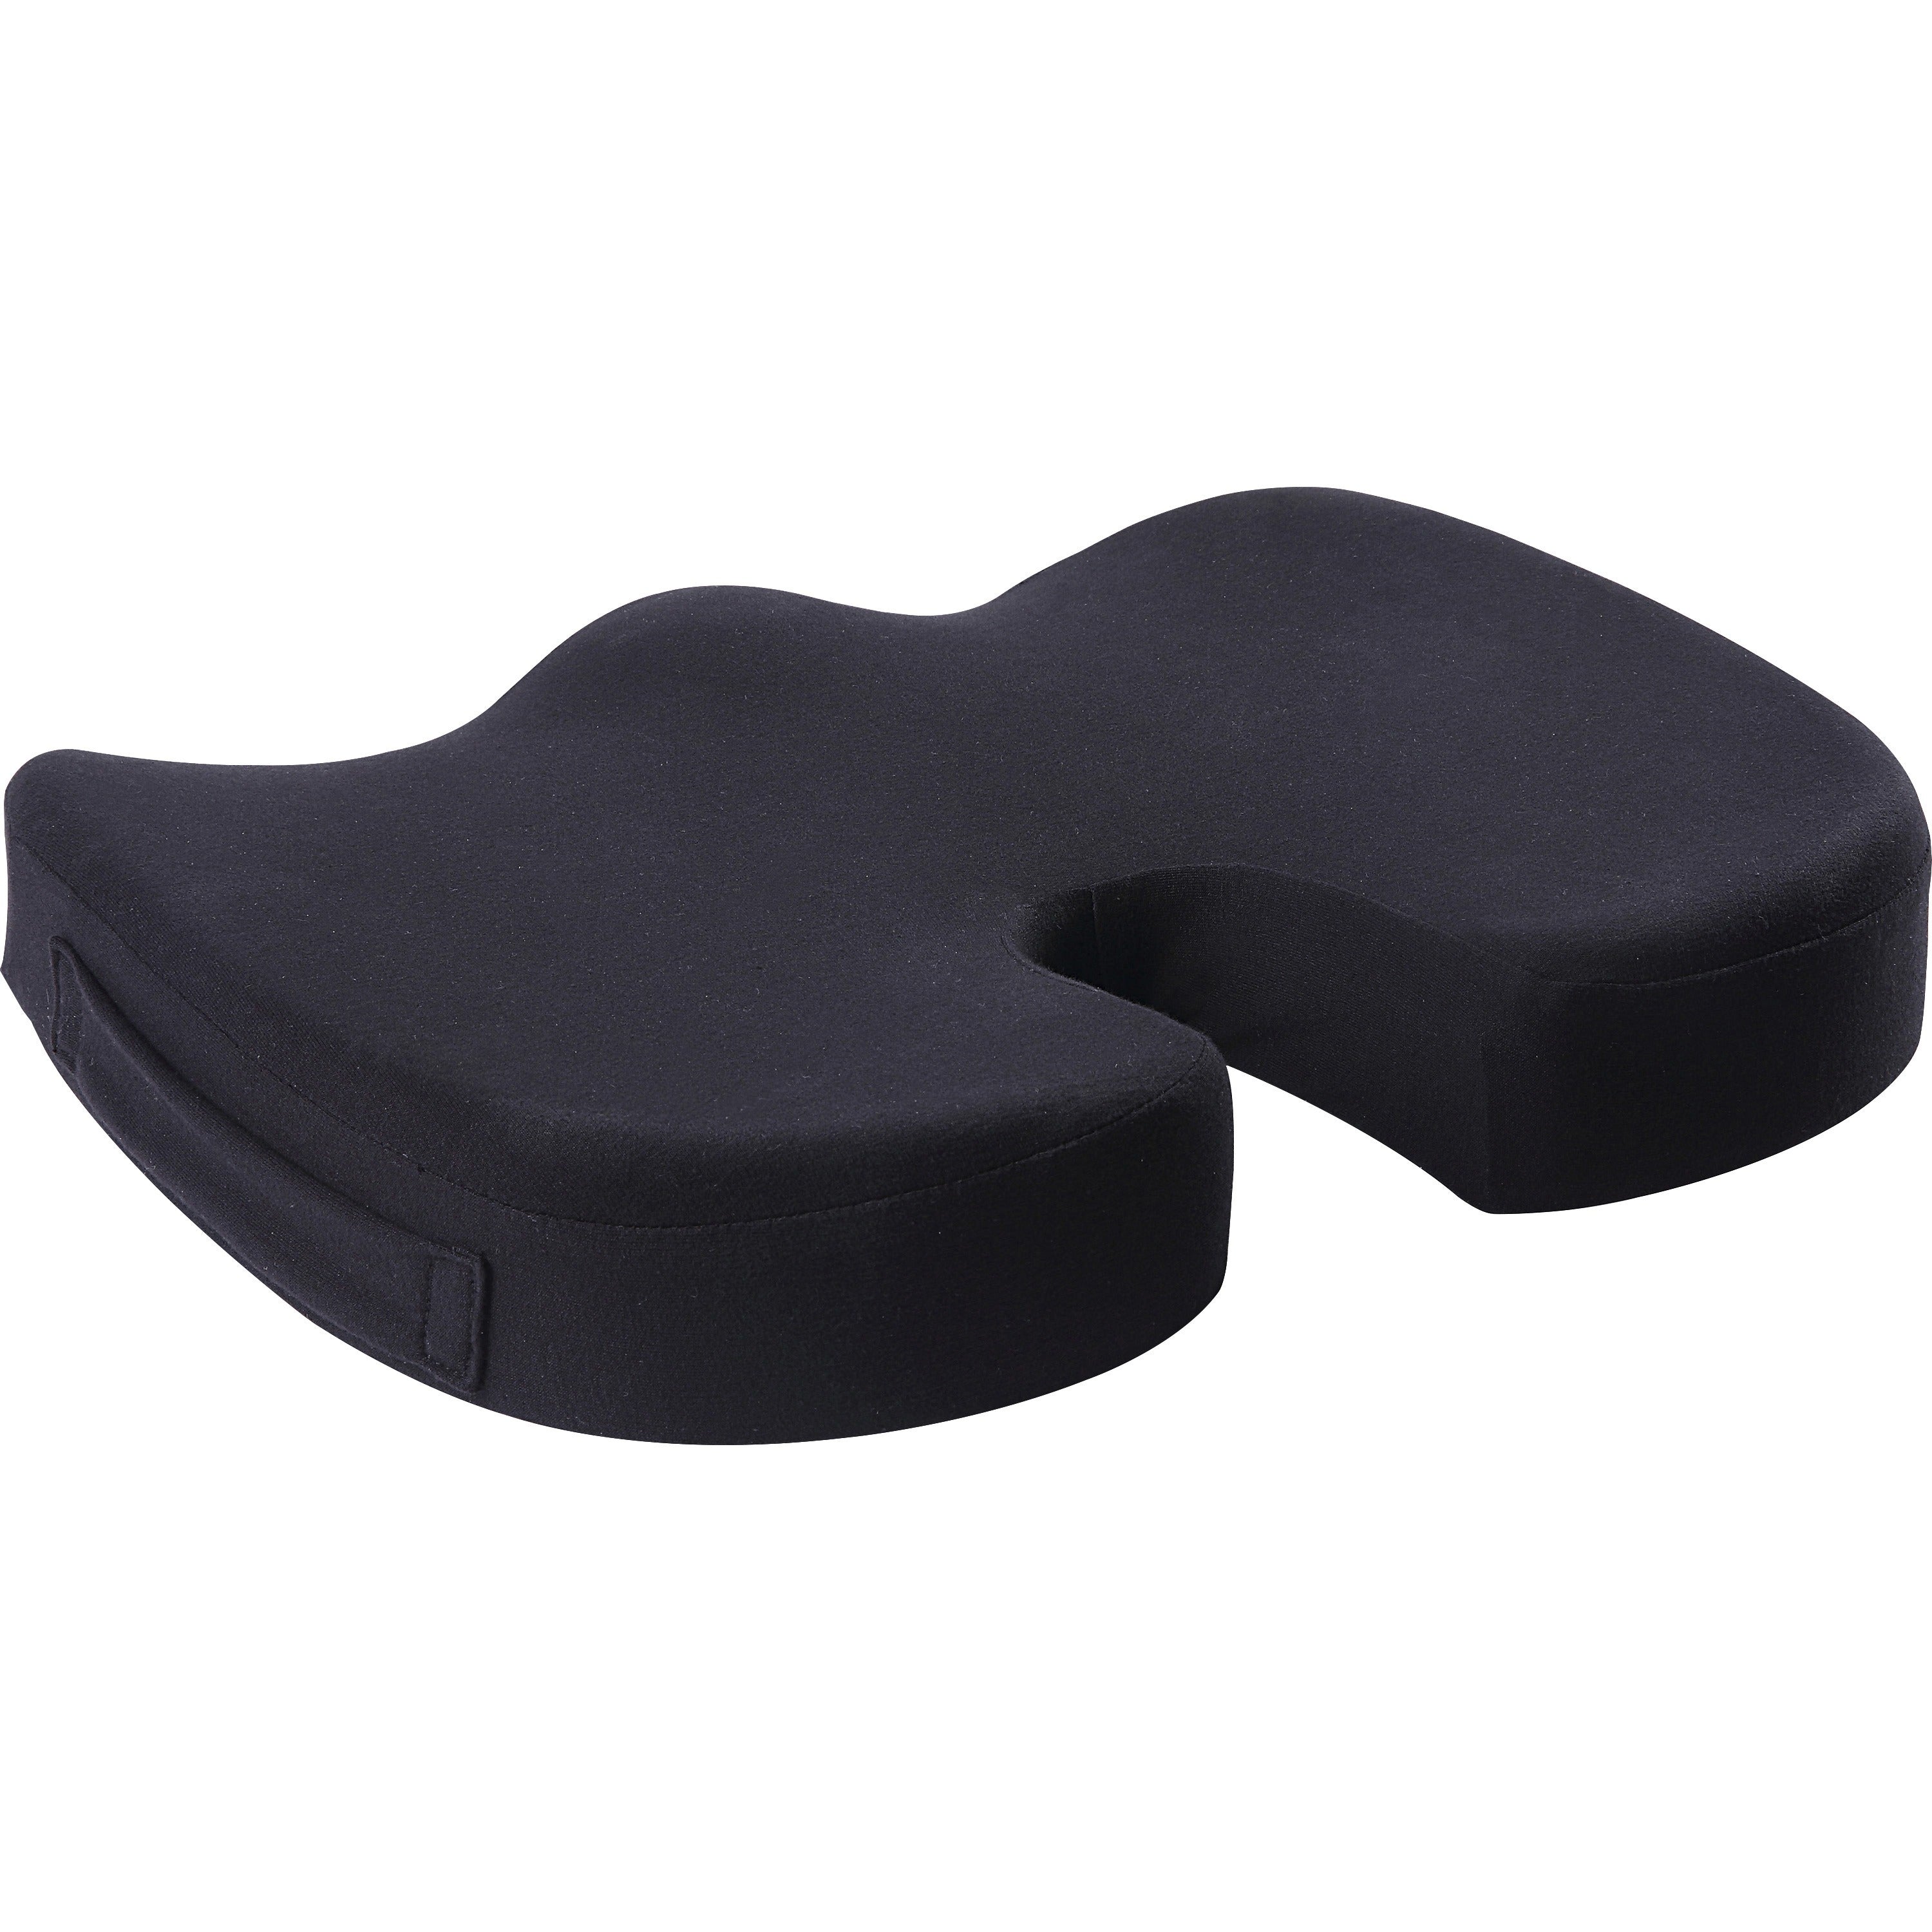 lorell-butterfly-shaped-seat-cushion-1750-x-1550-fabric-memory-foam-silicone-butterfly-comfortable-ergonomic-design-durable-machine-washable-zippered-anti-slip-black-1each_llr18307 - 1